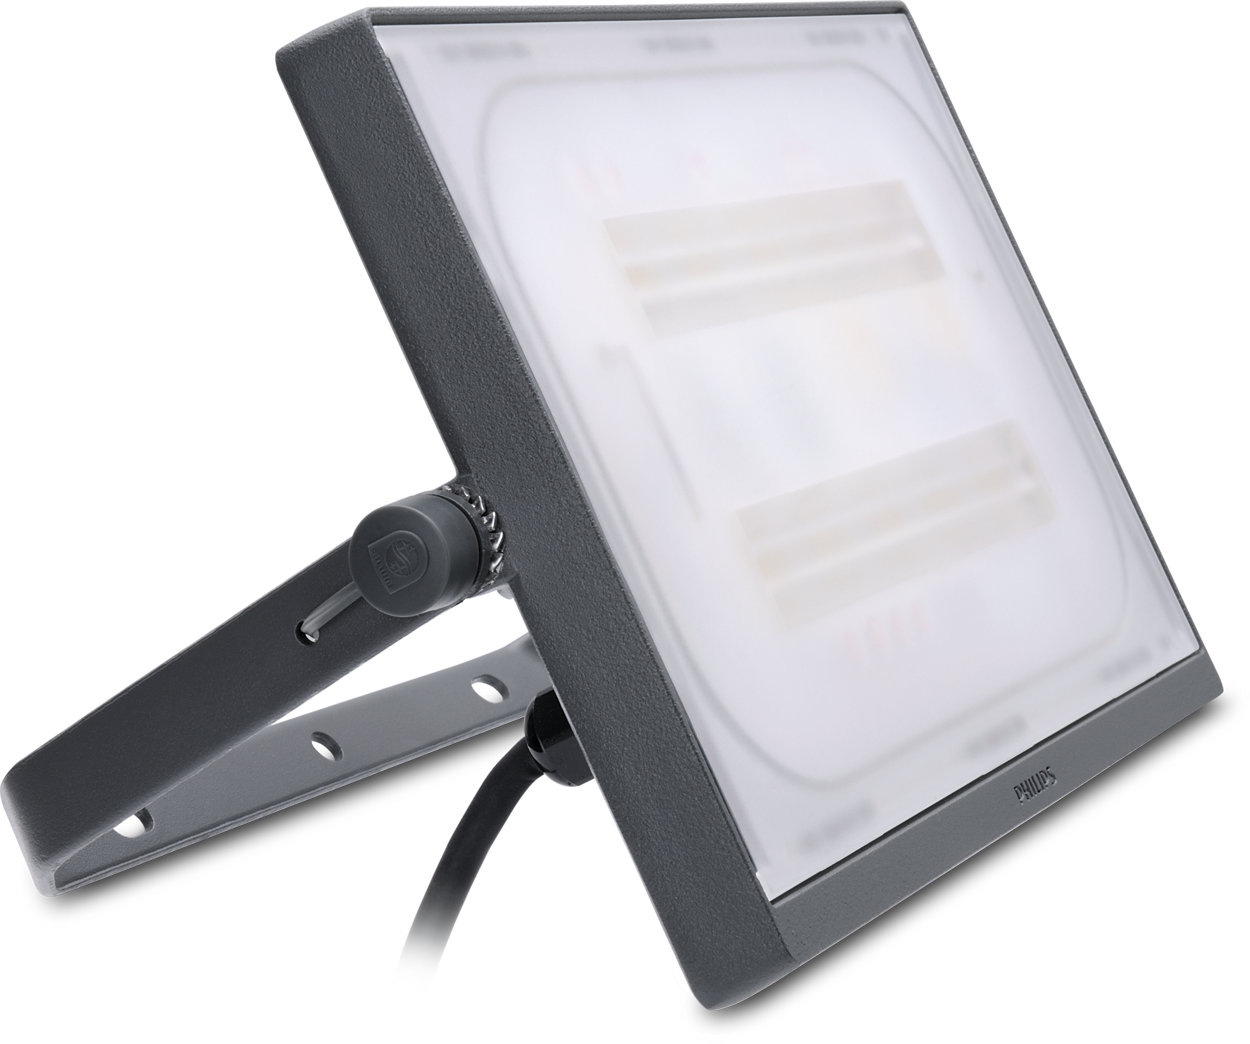 A reliable and high-performance LED floodlight